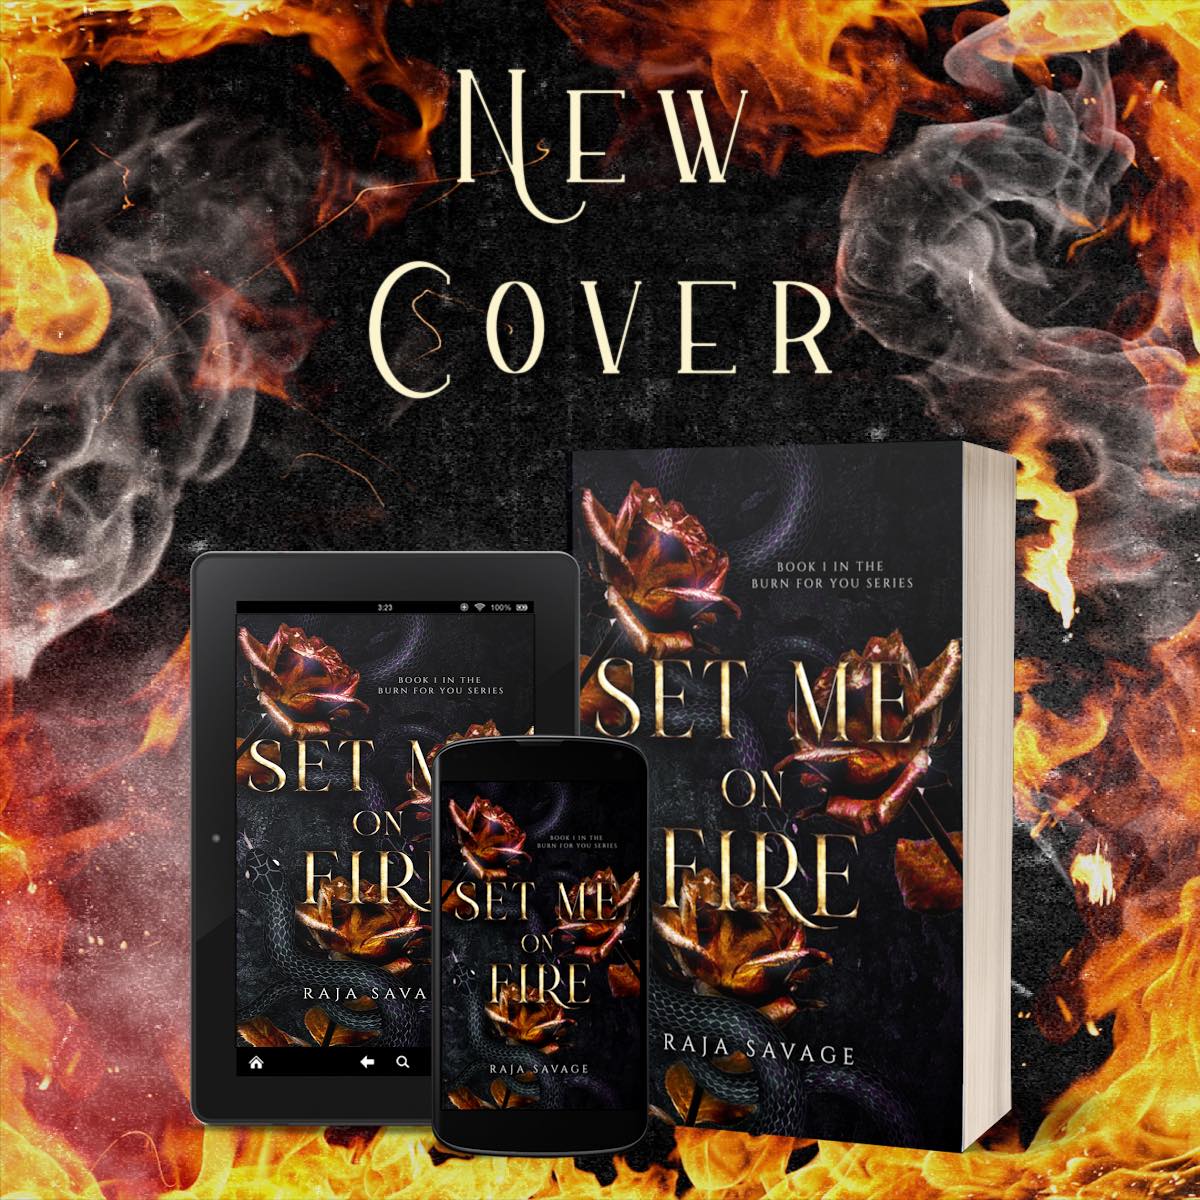 🔥Set Me On Fire has a new cover🔥 𝐒𝐞𝐭 𝐌𝐞 𝐎𝐧 𝐅𝐢𝐫𝐞 is a dark romantic suspense filled with angst, love, lies, deceit and more by Author Raja Savage books2read.com/u/3R0KqR #newcover #darkromance #enemiestolovers #loverstoenemies #whychoose